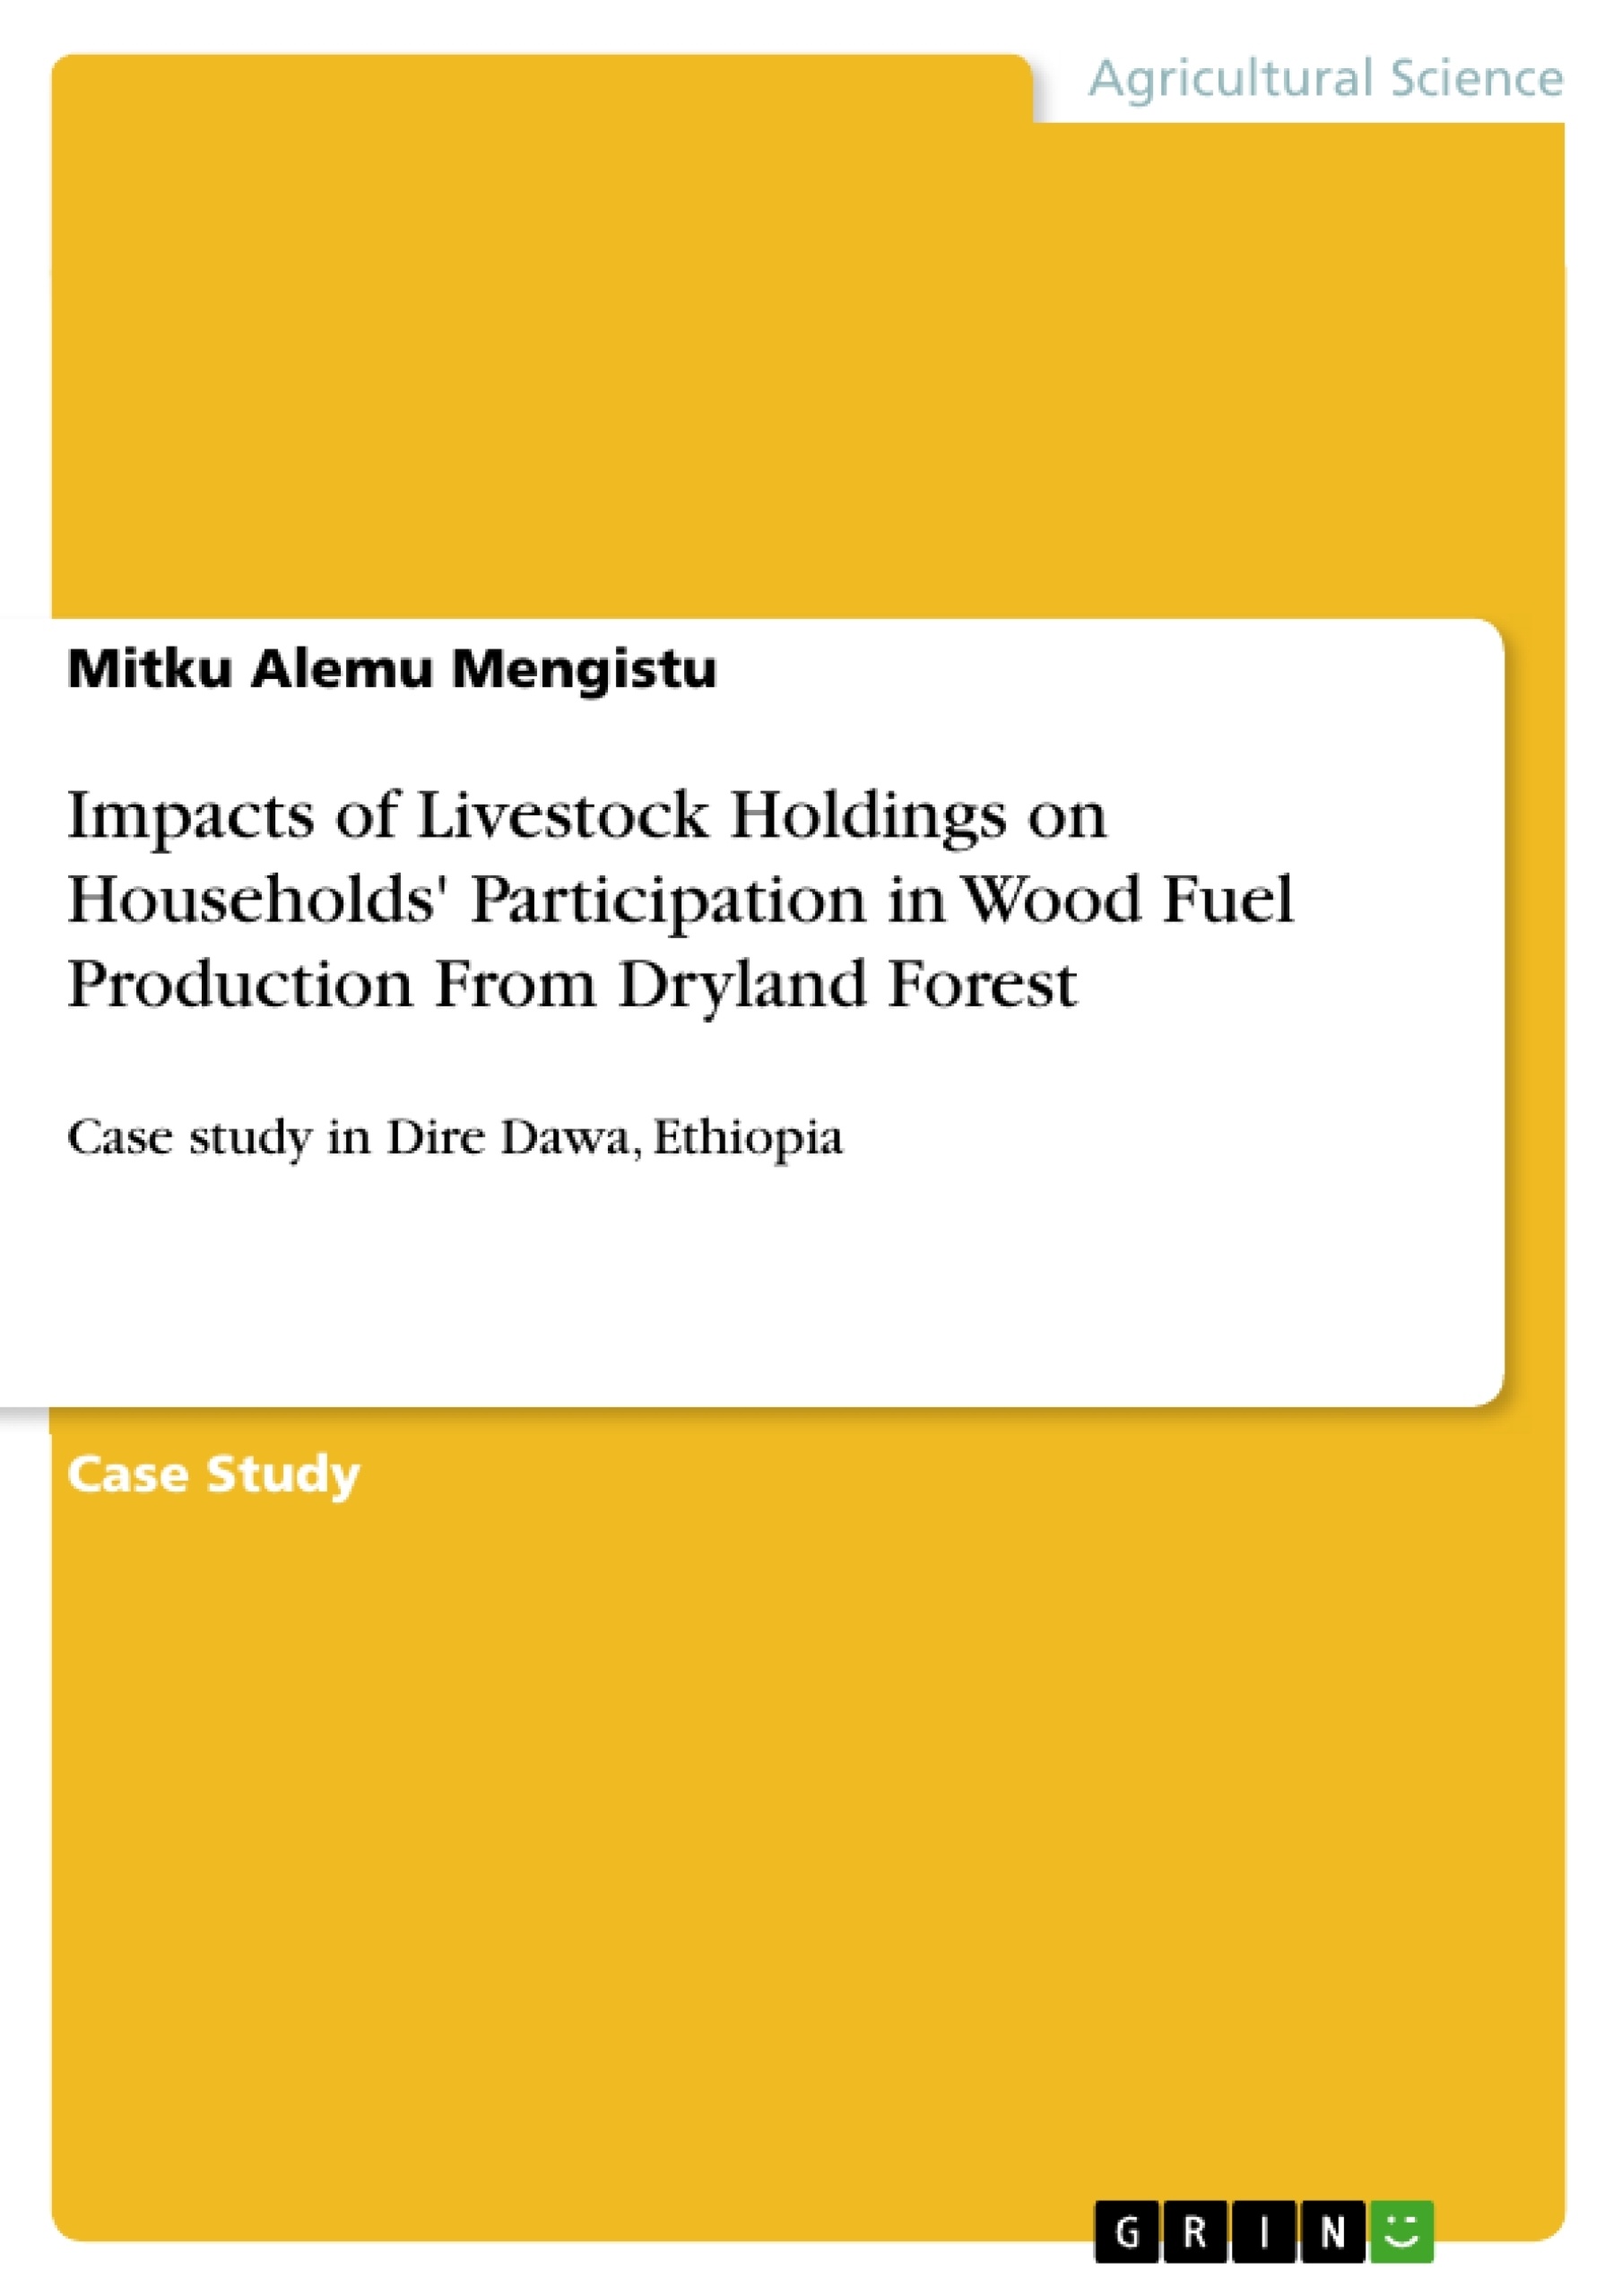 Titre: Impacts of Livestock Holdings on Households' Participation in Wood Fuel Production From Dryland Forest